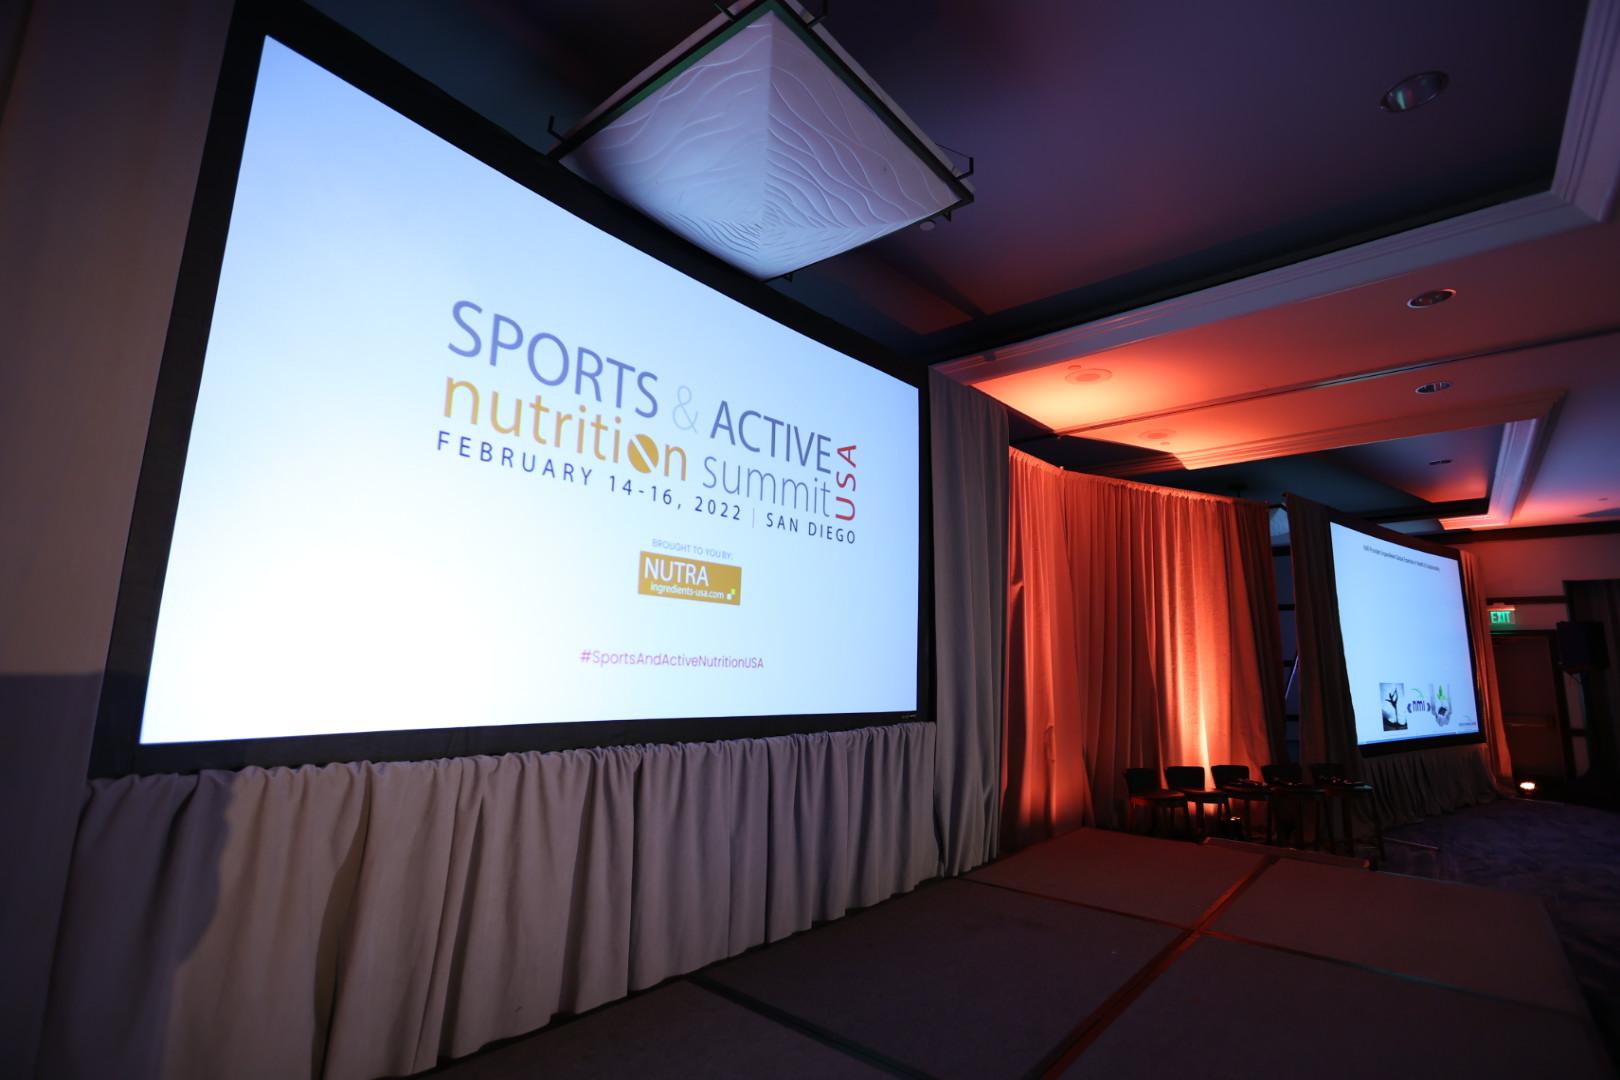 Sports nutrition can look forward to bright future, event presenters agree